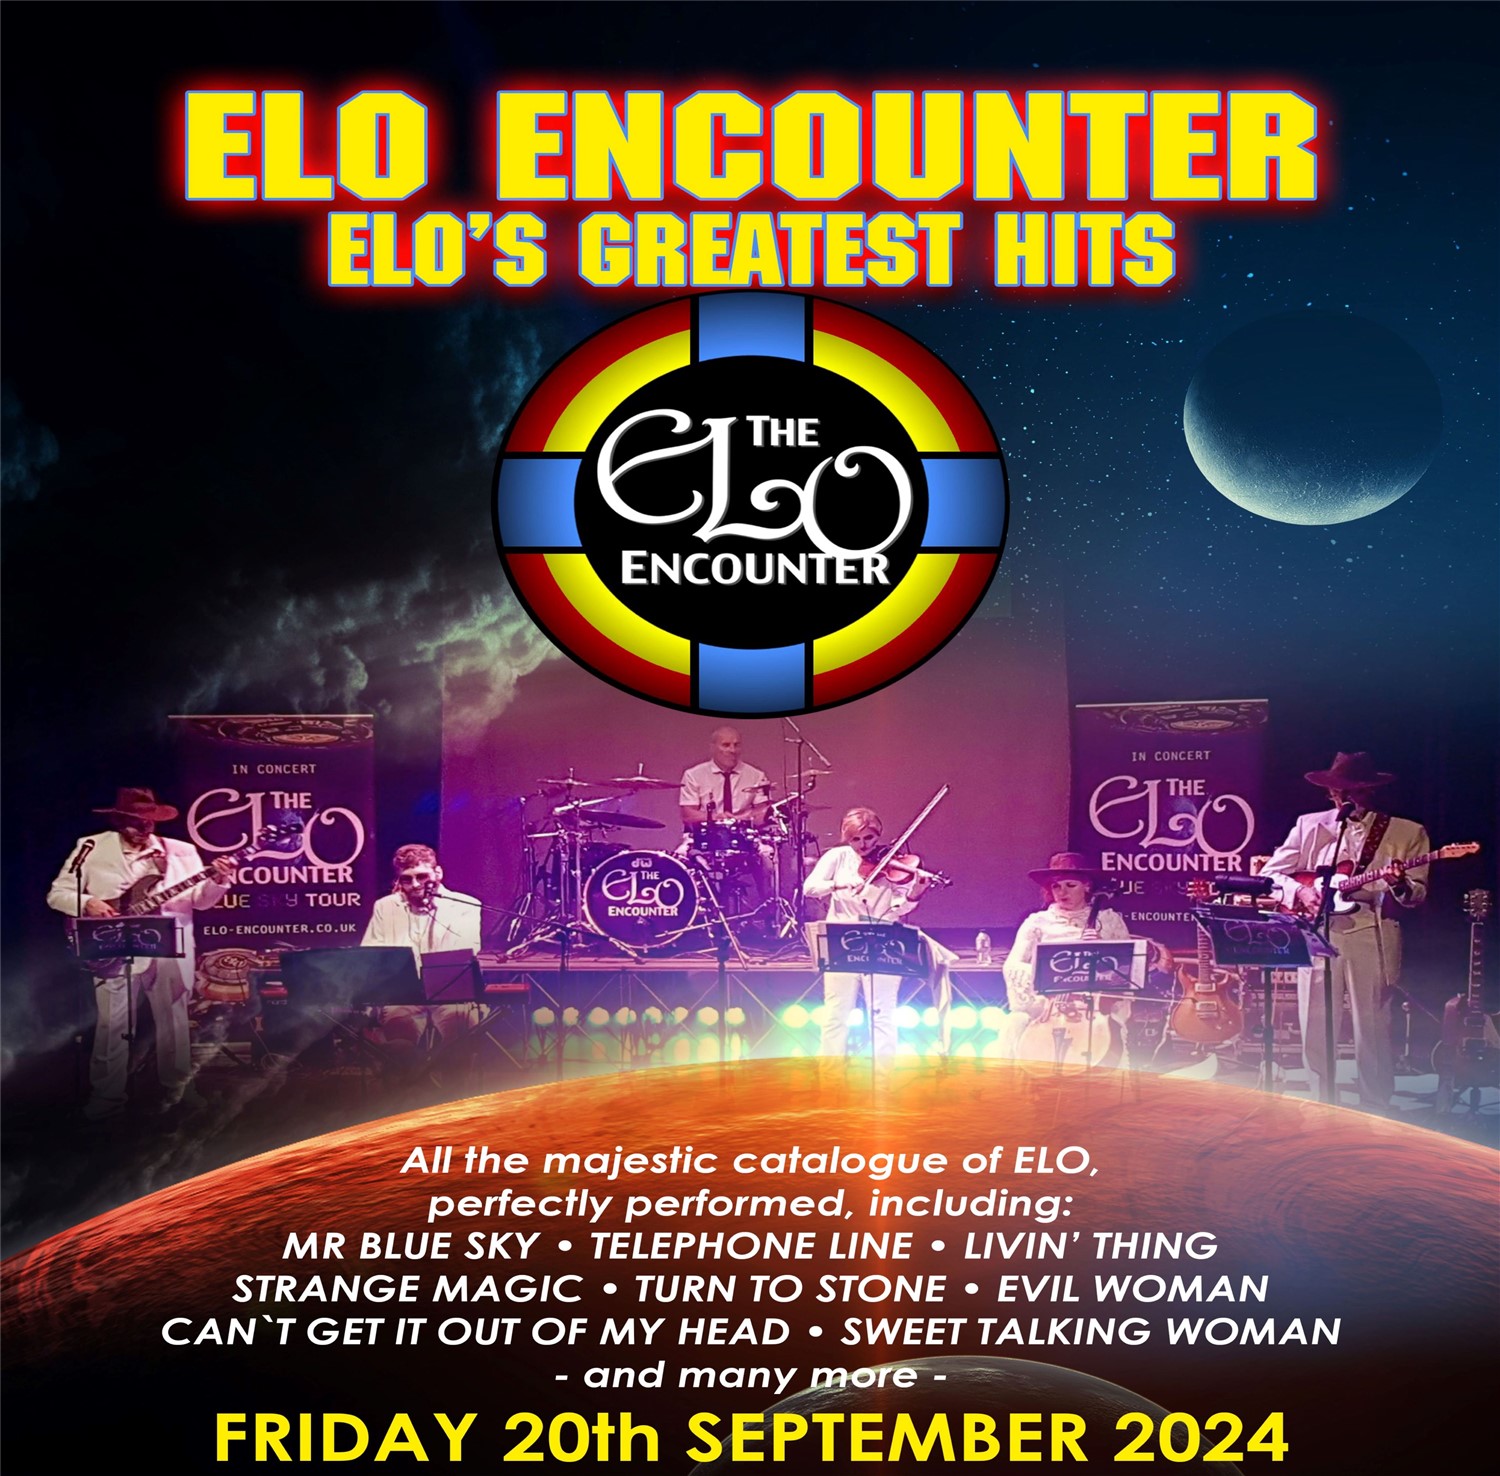 ELO Encounter ELOs Greatest Hits on Sep 20, 19:30@Sutton Coldfield Town Hall - Pick a seat, Buy tickets and Get information on Sutton Coldfield Town Hall 